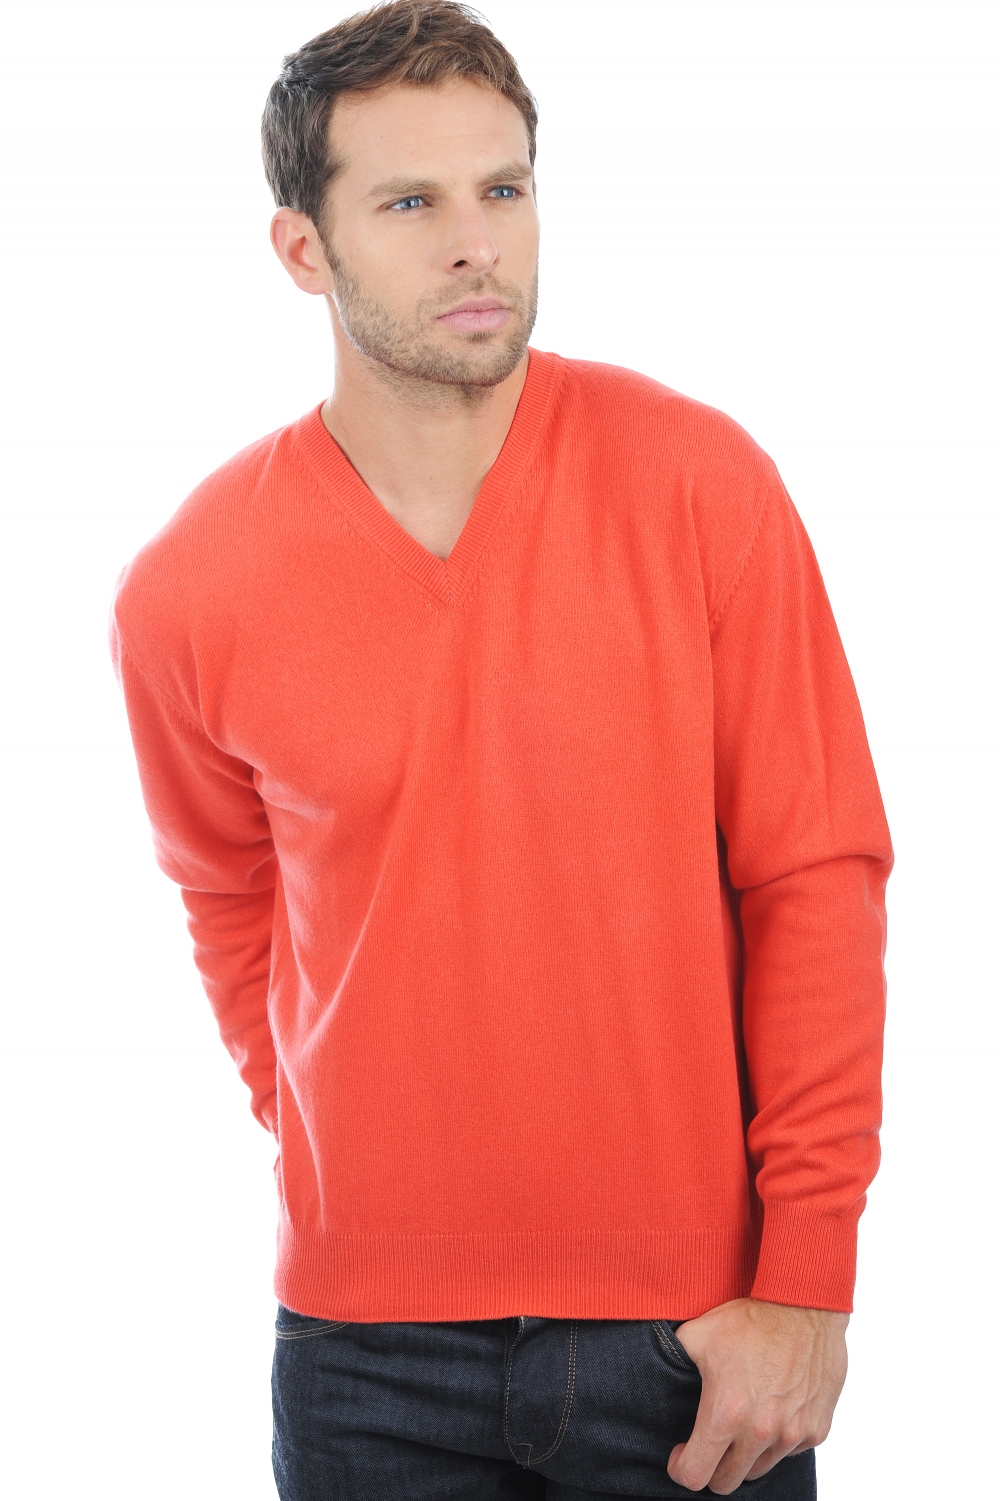 Cachemire pull homme col v gaspard corail lumineux m